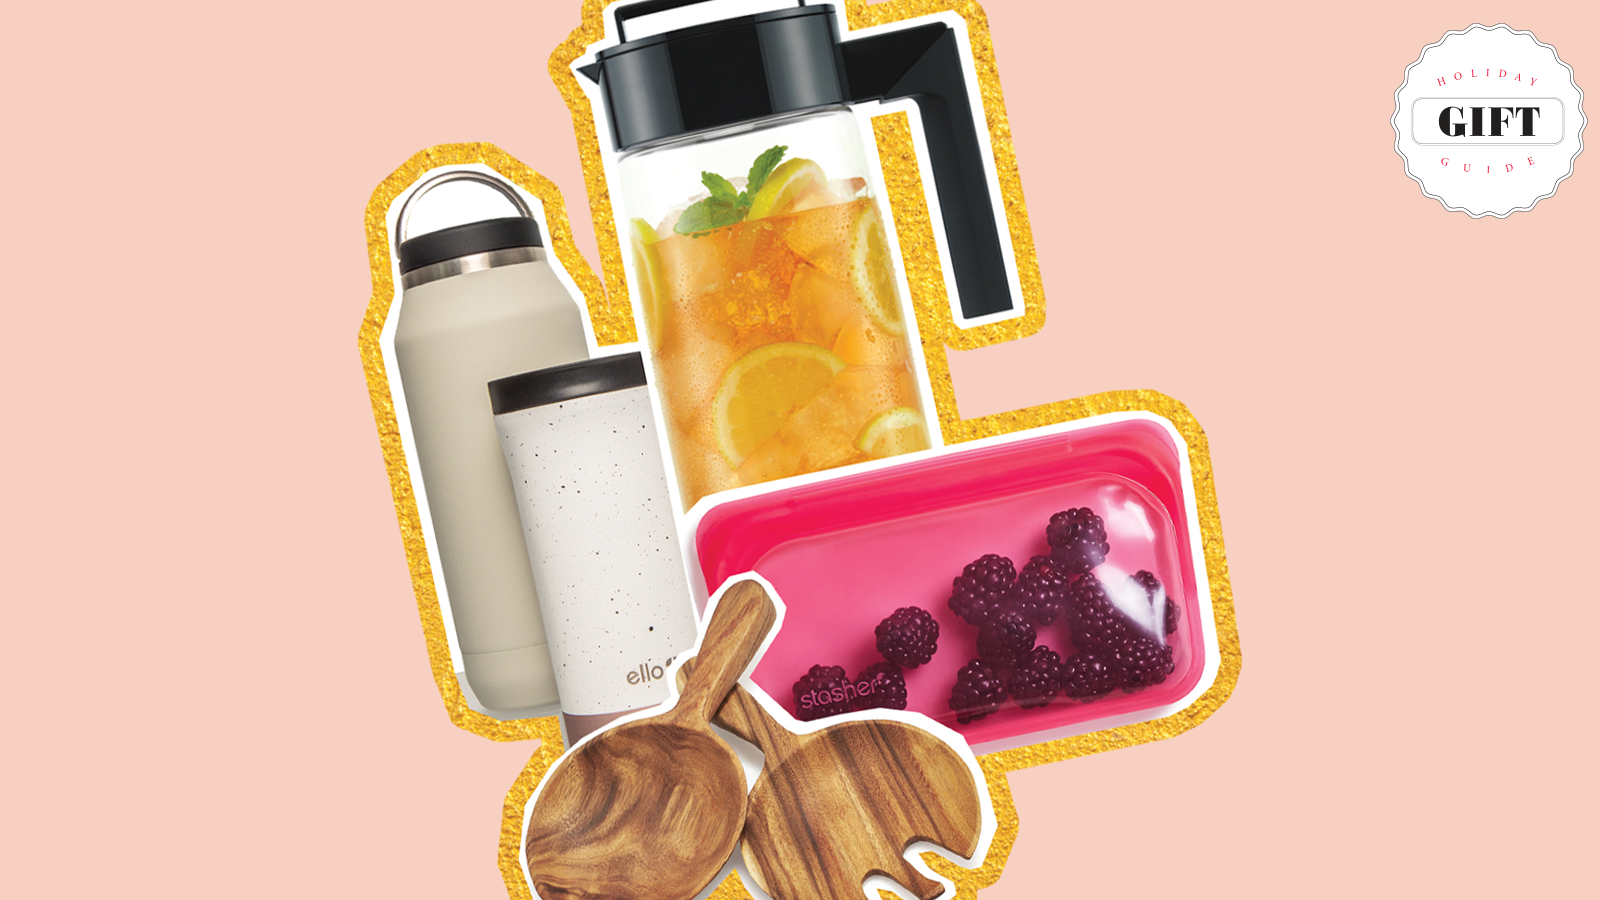 Top 9 Gifts for Meal Preppers - Get them exactly what they want